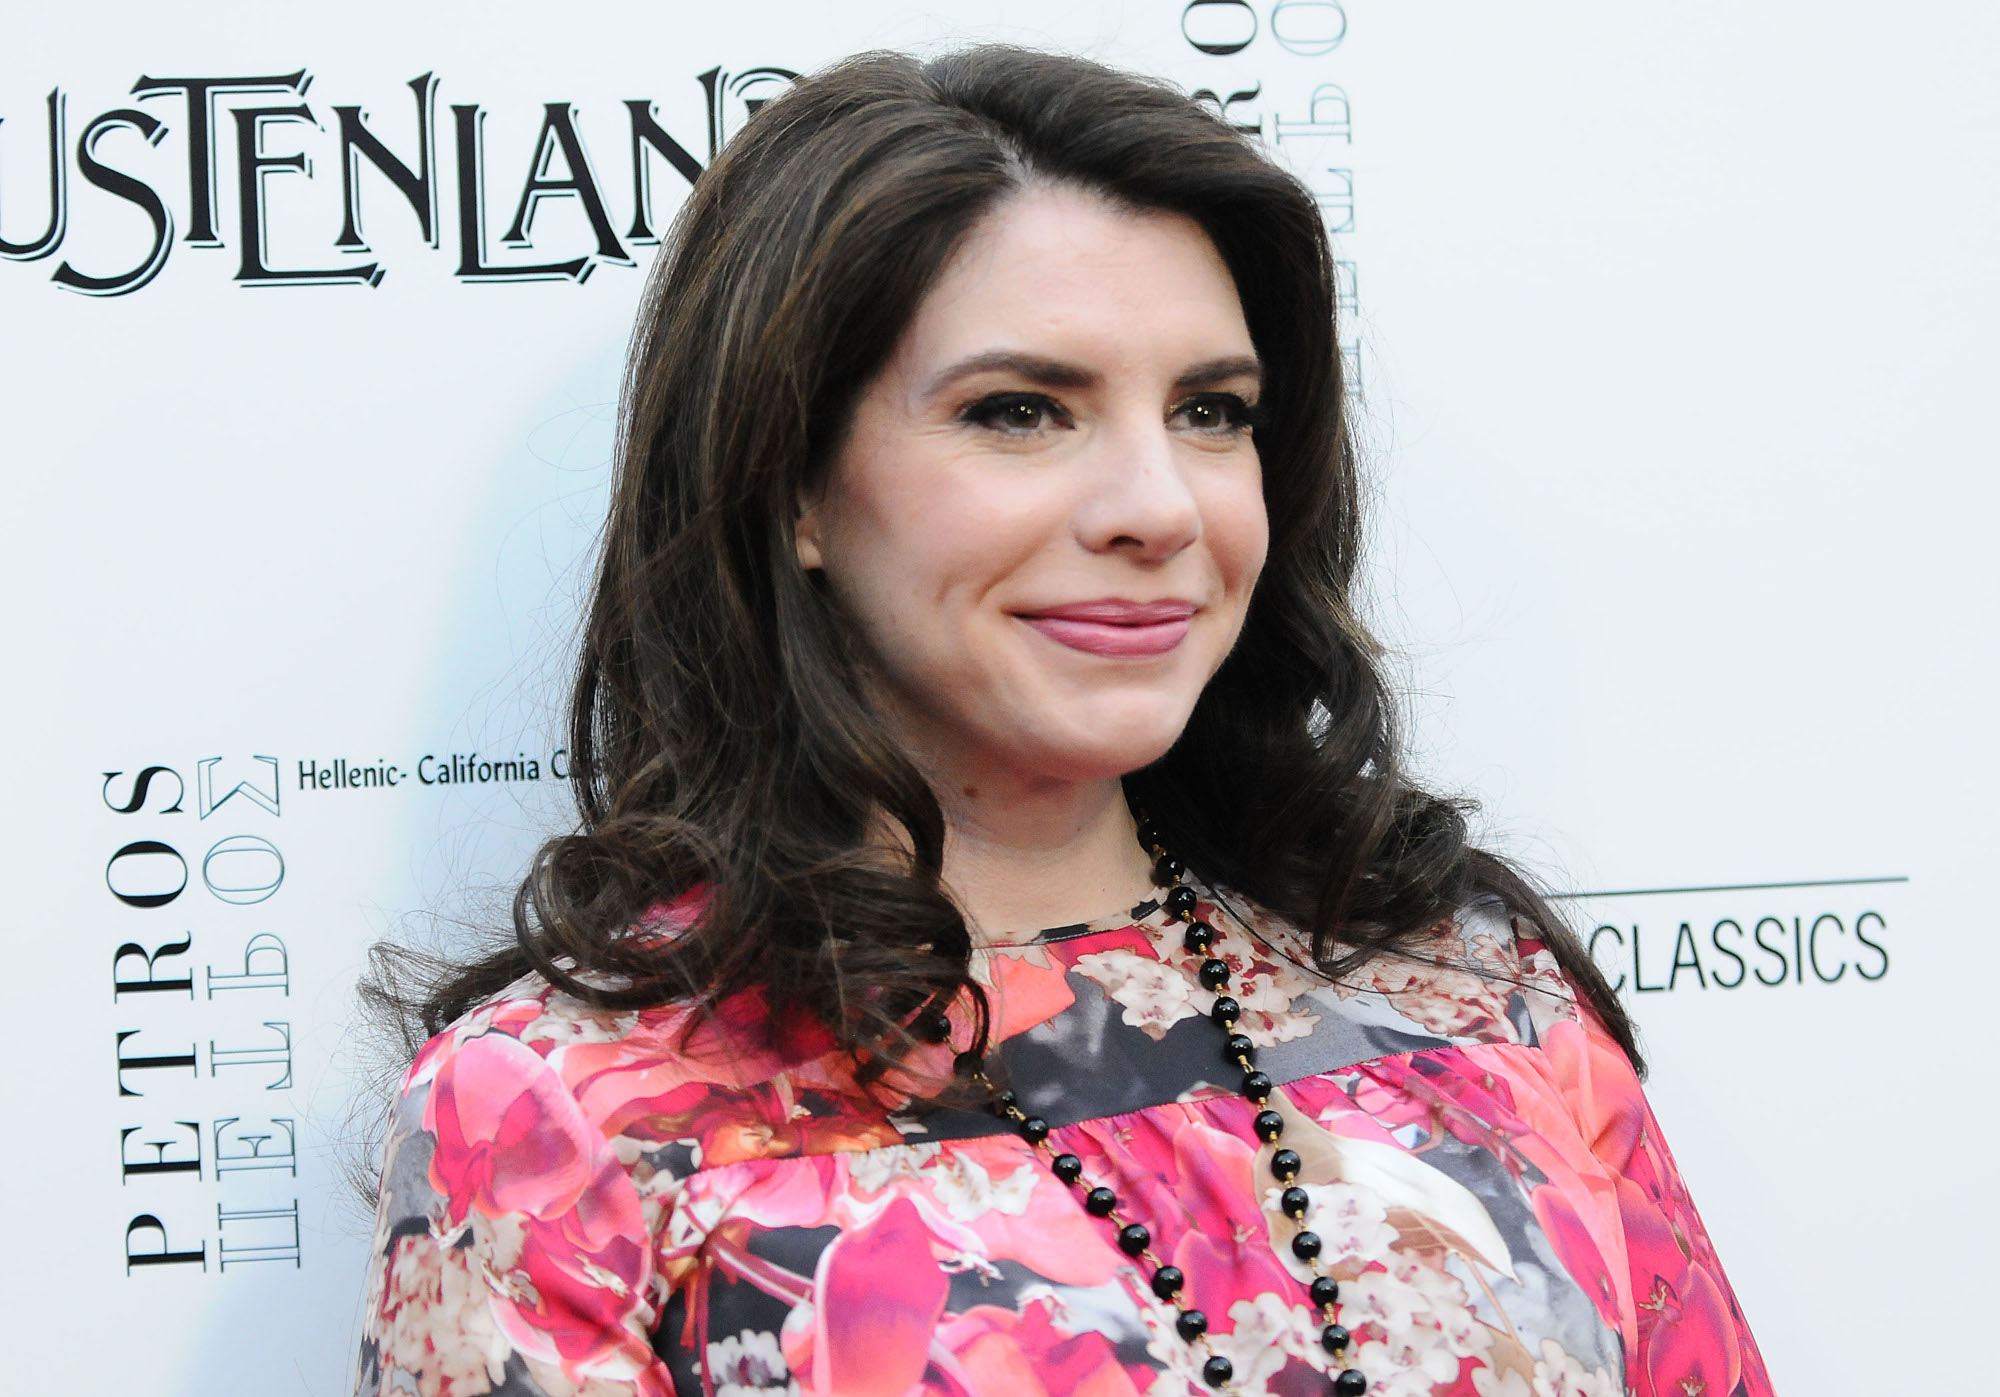 Twilight author Stephenie Meyer wearing a floral dress and black beads around her neck